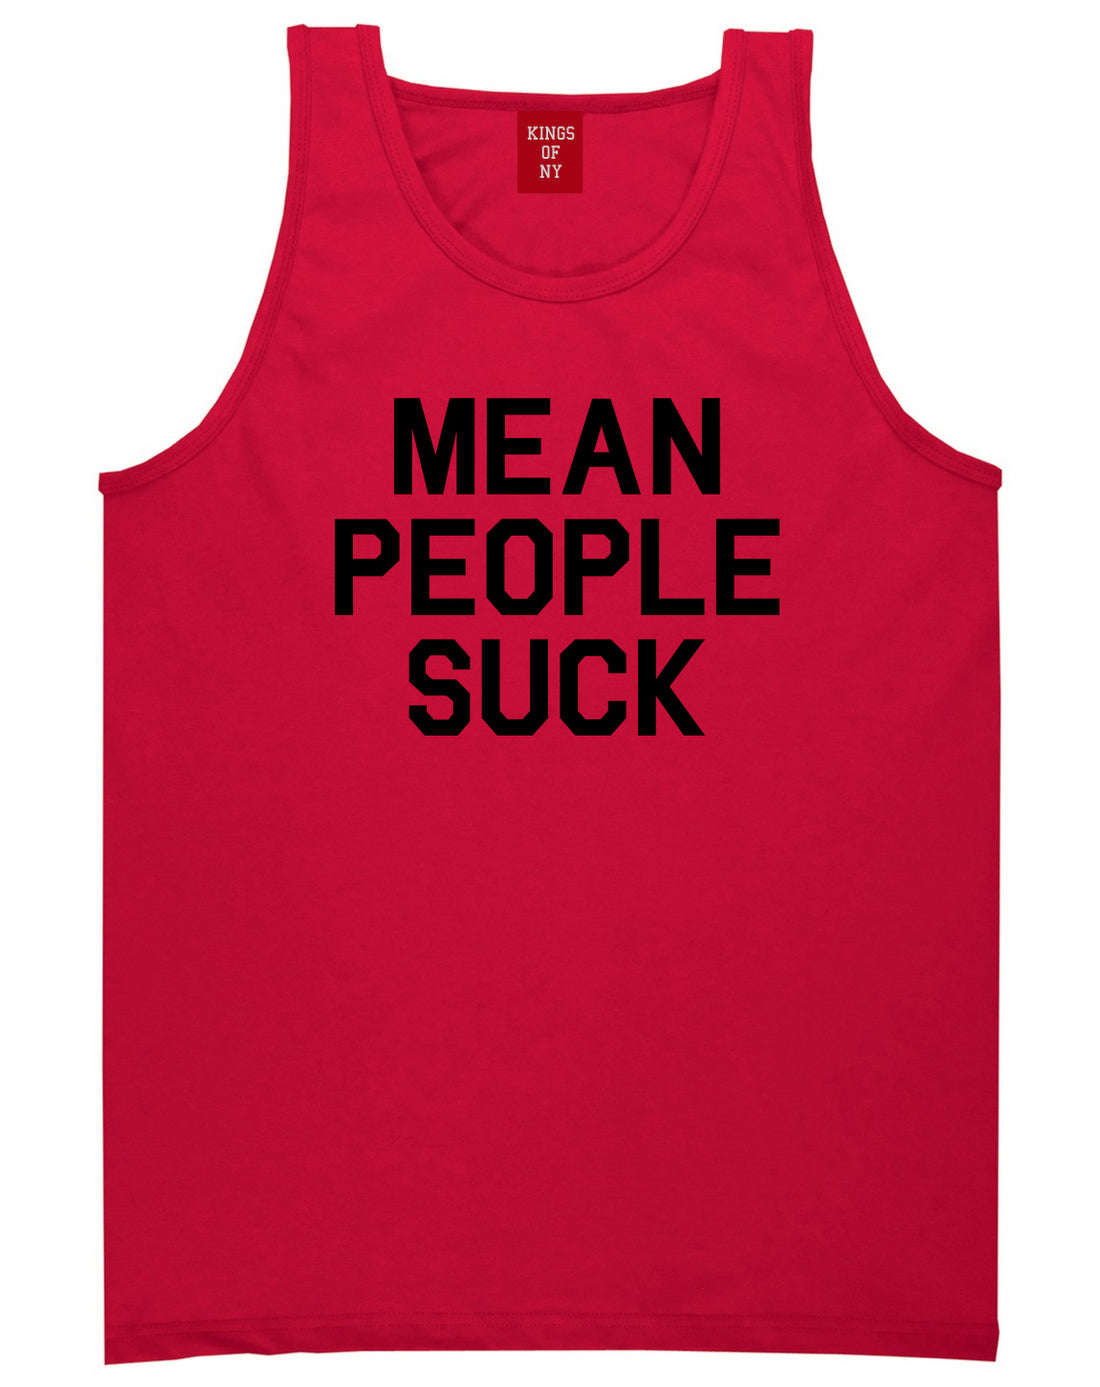 Mean People Suck Mens Tank Top Shirt Red by Kings Of NY